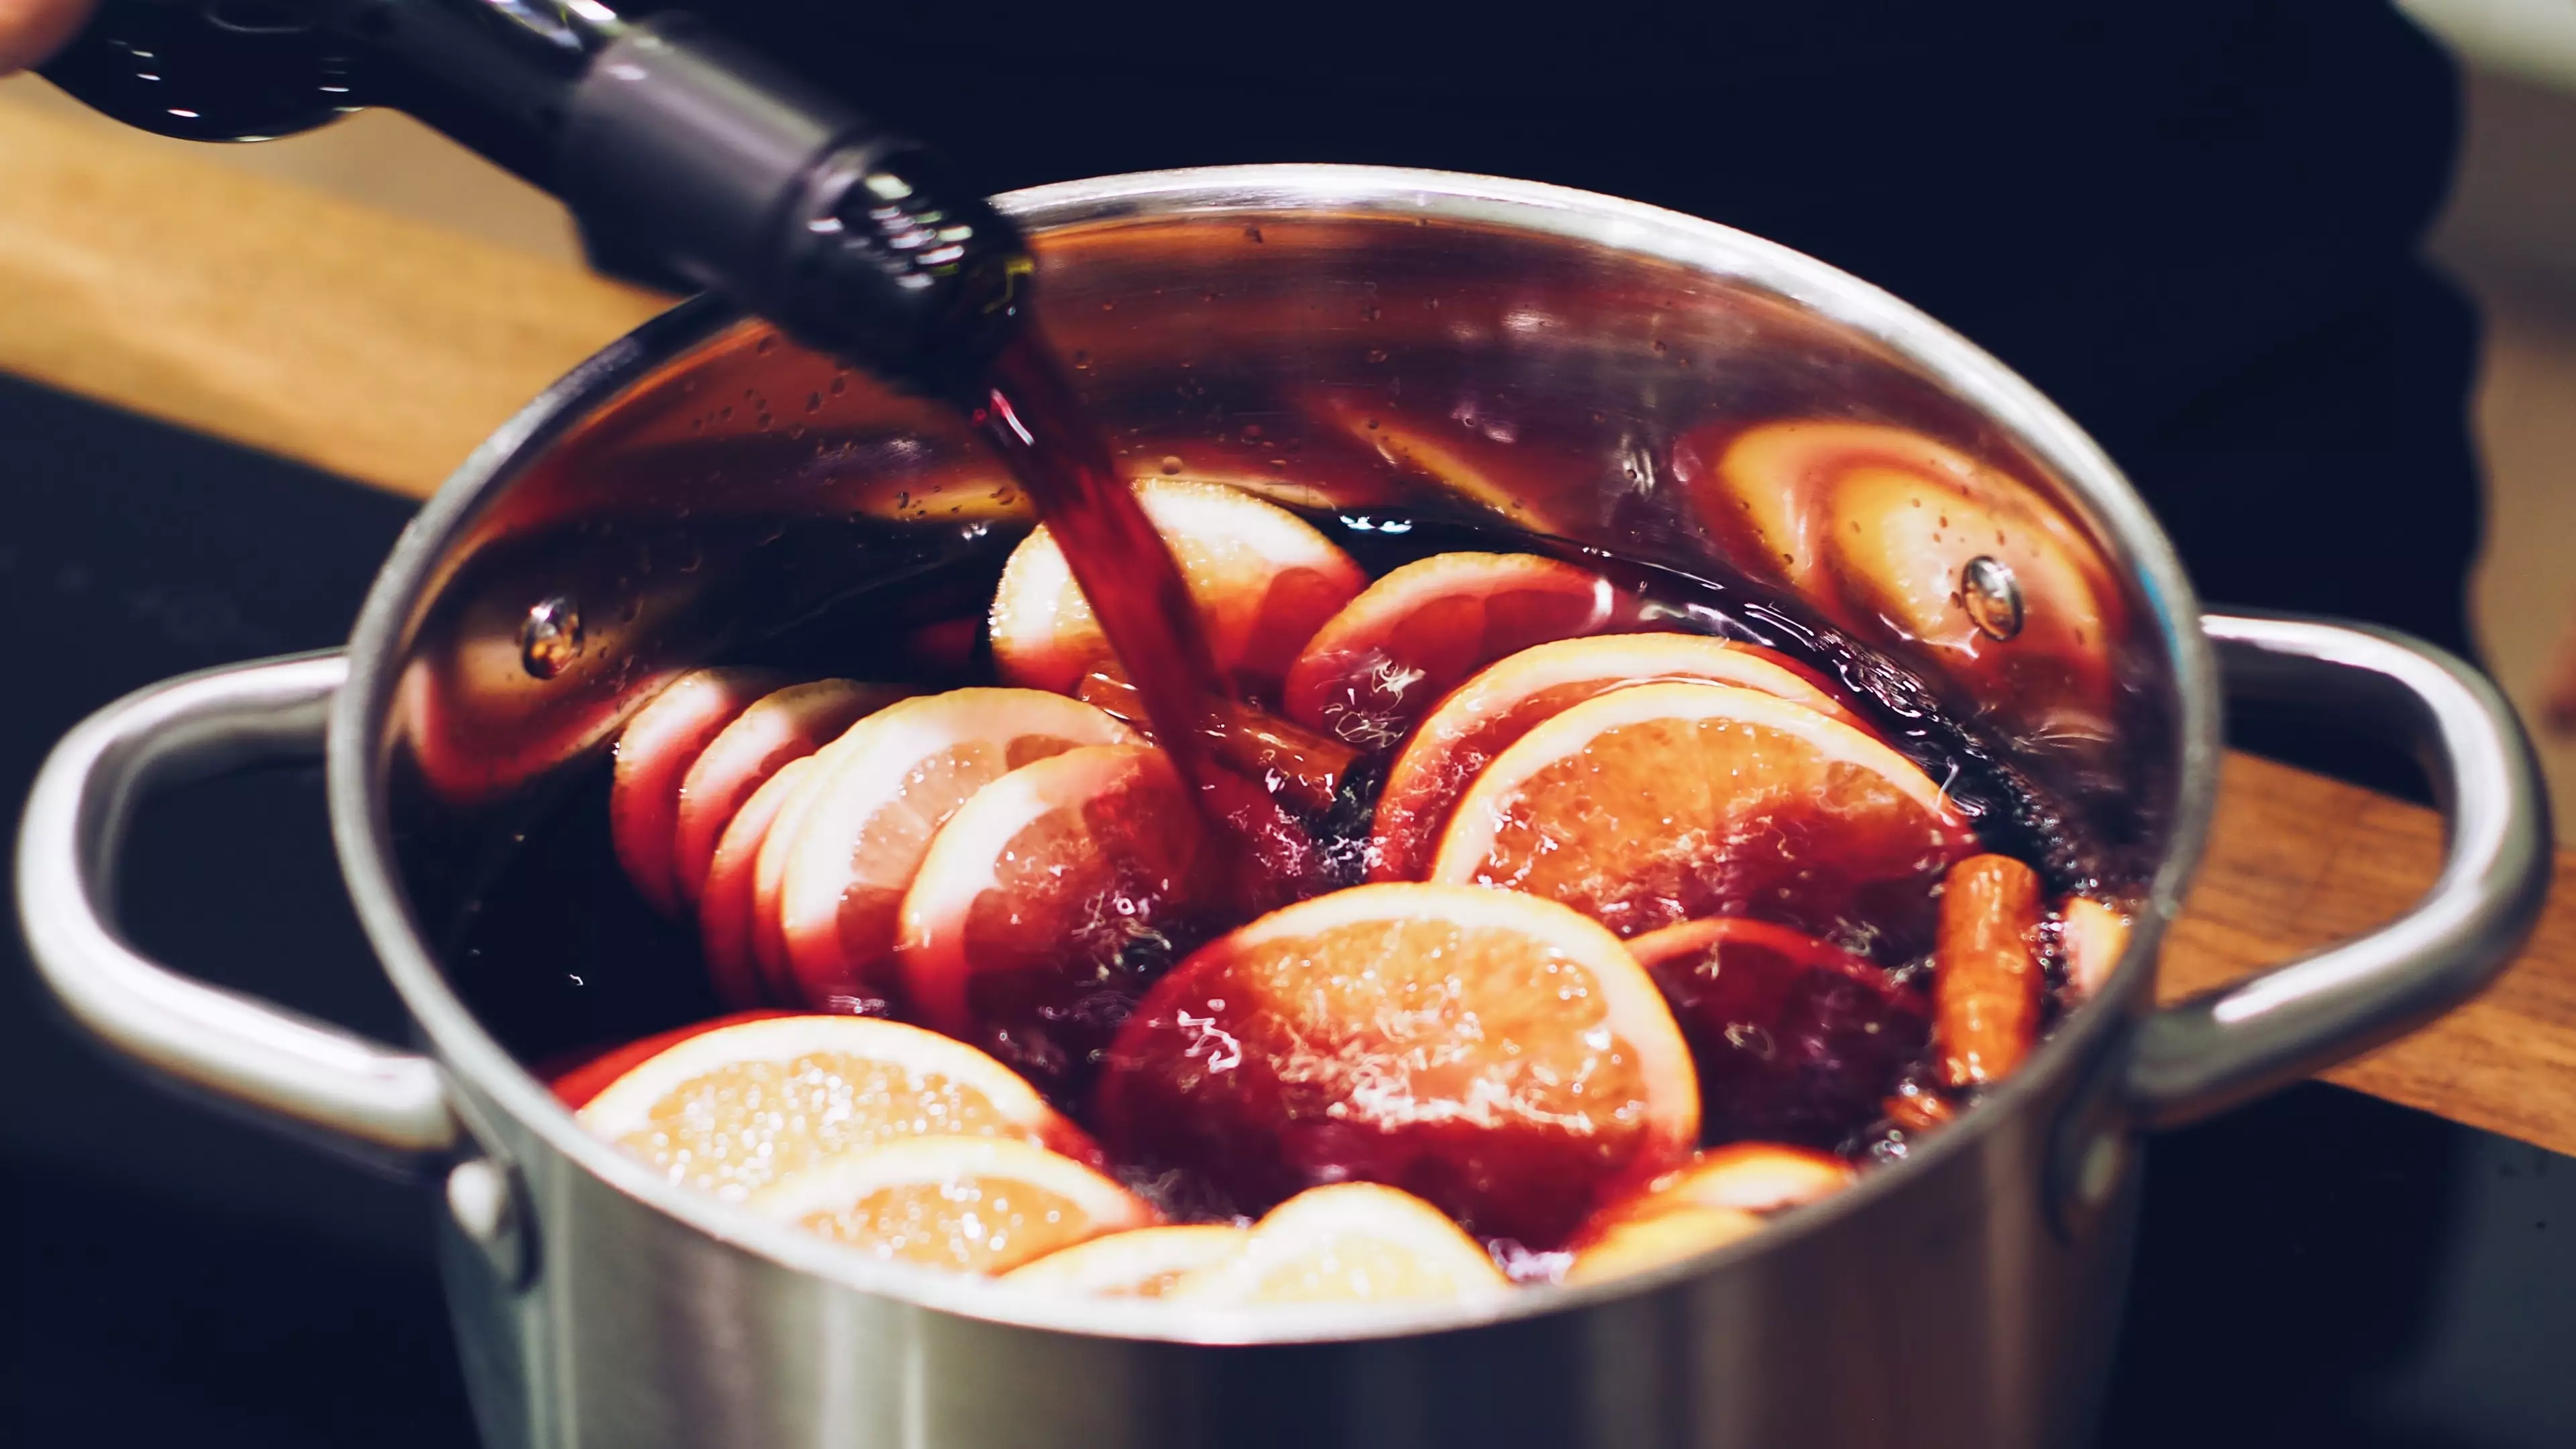 There is no better git for a mulled wine lover. (